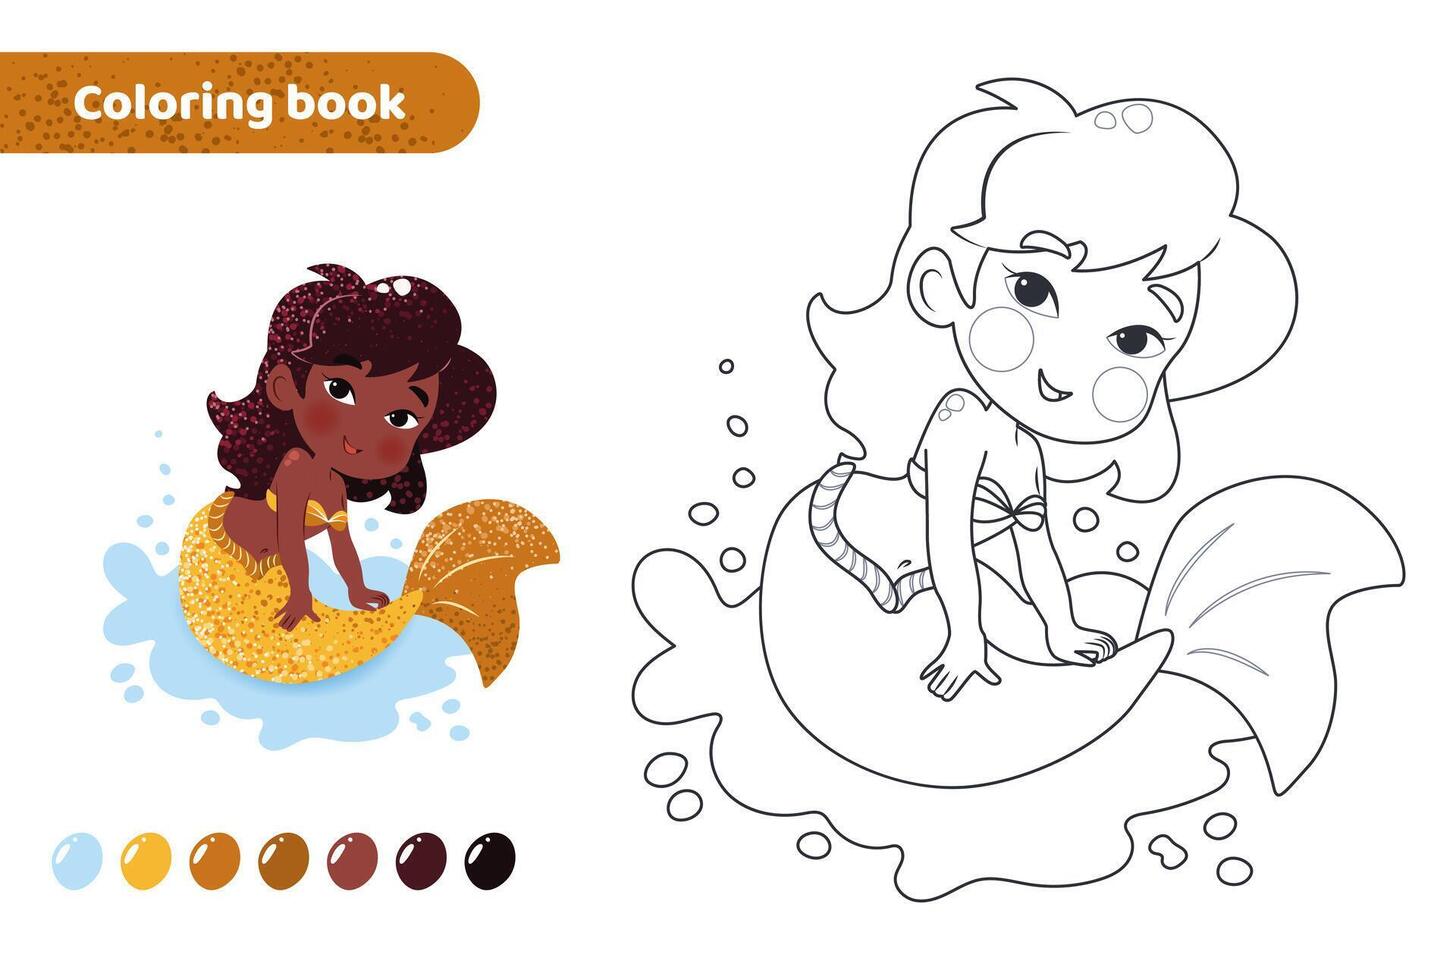 Coloring book for kids. Worksheet for drawing with cartoon mermaid. Cute magical creature with tail. Coloring page with color palette for children. Vector illustration.